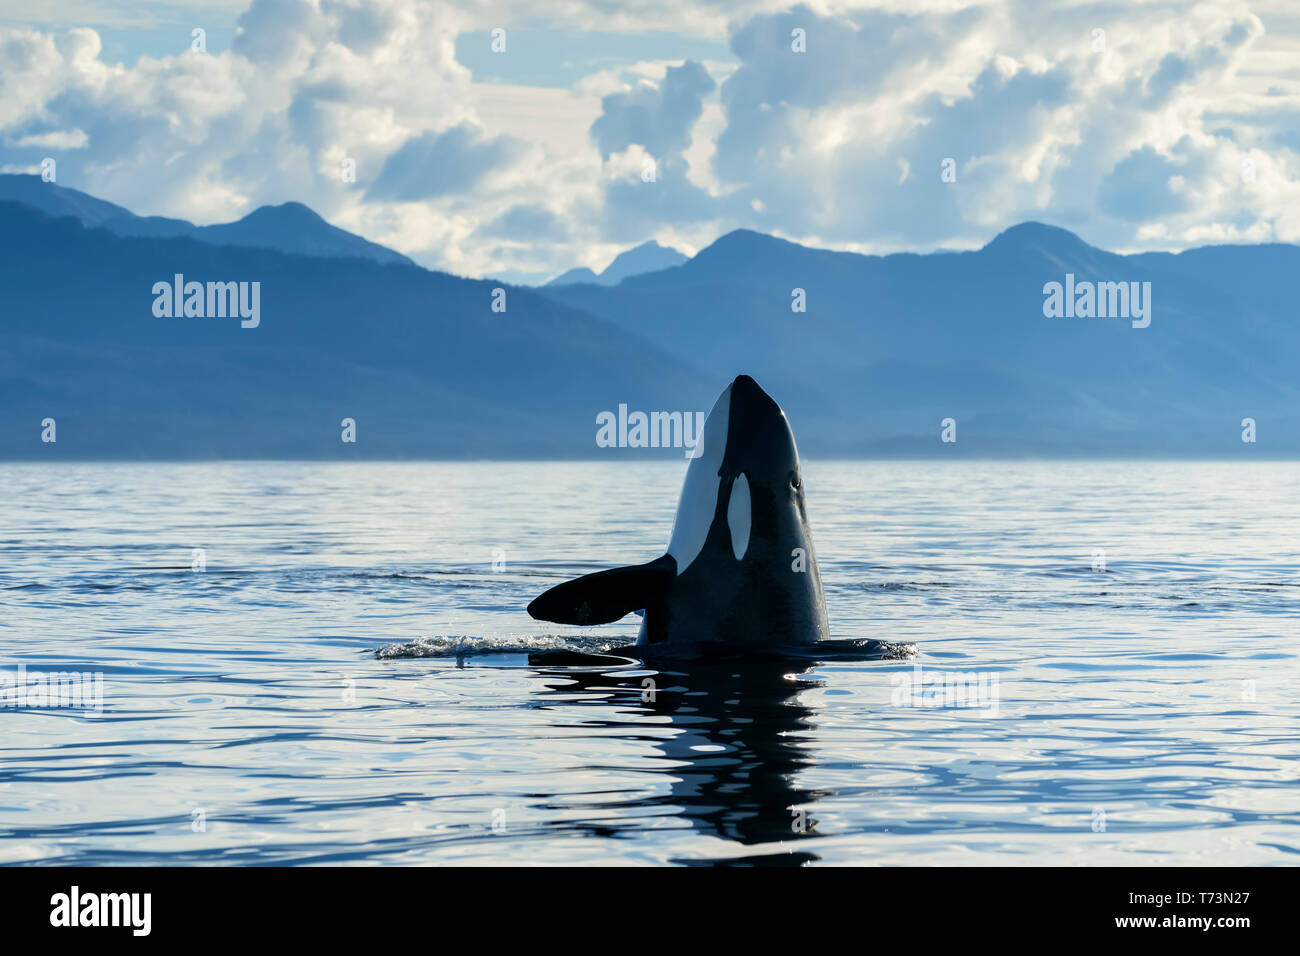 An Orca (Orcinus orca), also known as a killer whale, spyhopping to get an above surface view of its surroundings, Chatham Strait, Inside Passage, ... Stock Photo